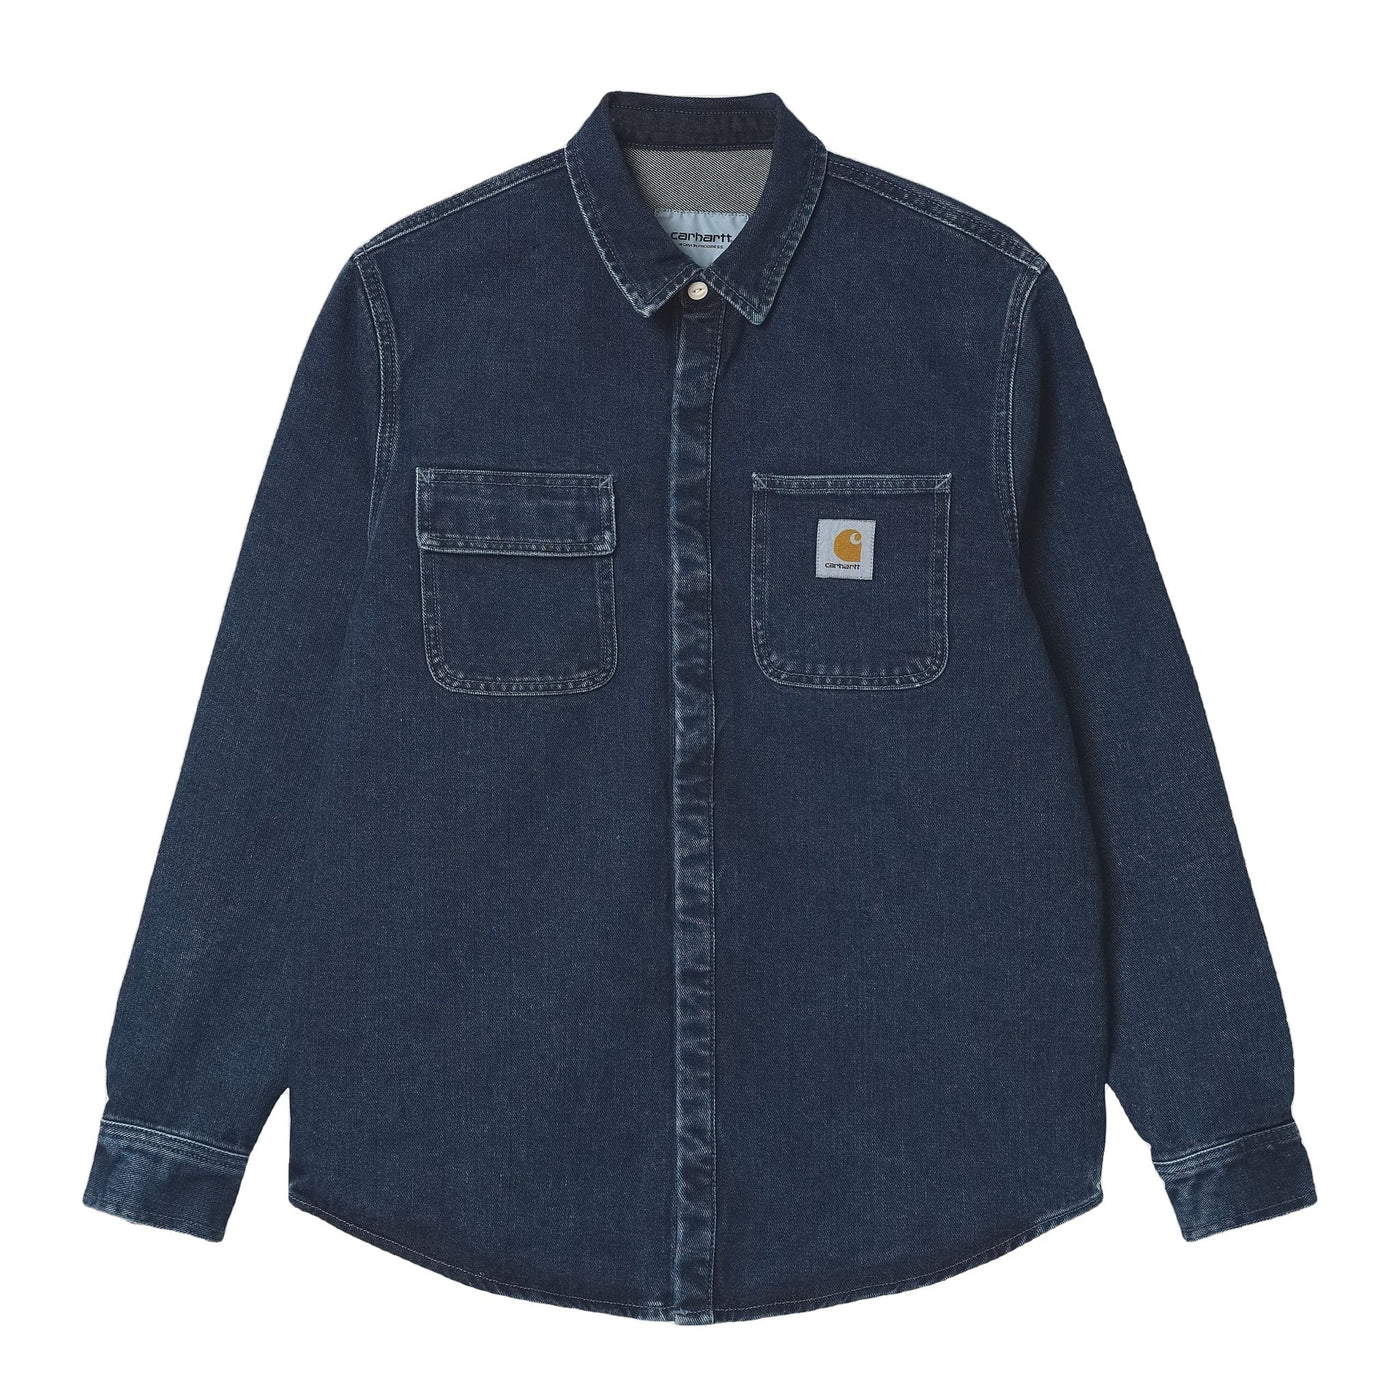 Carhartt WIP - Chemise Salinac - Blue Stone Washed - Lothaire